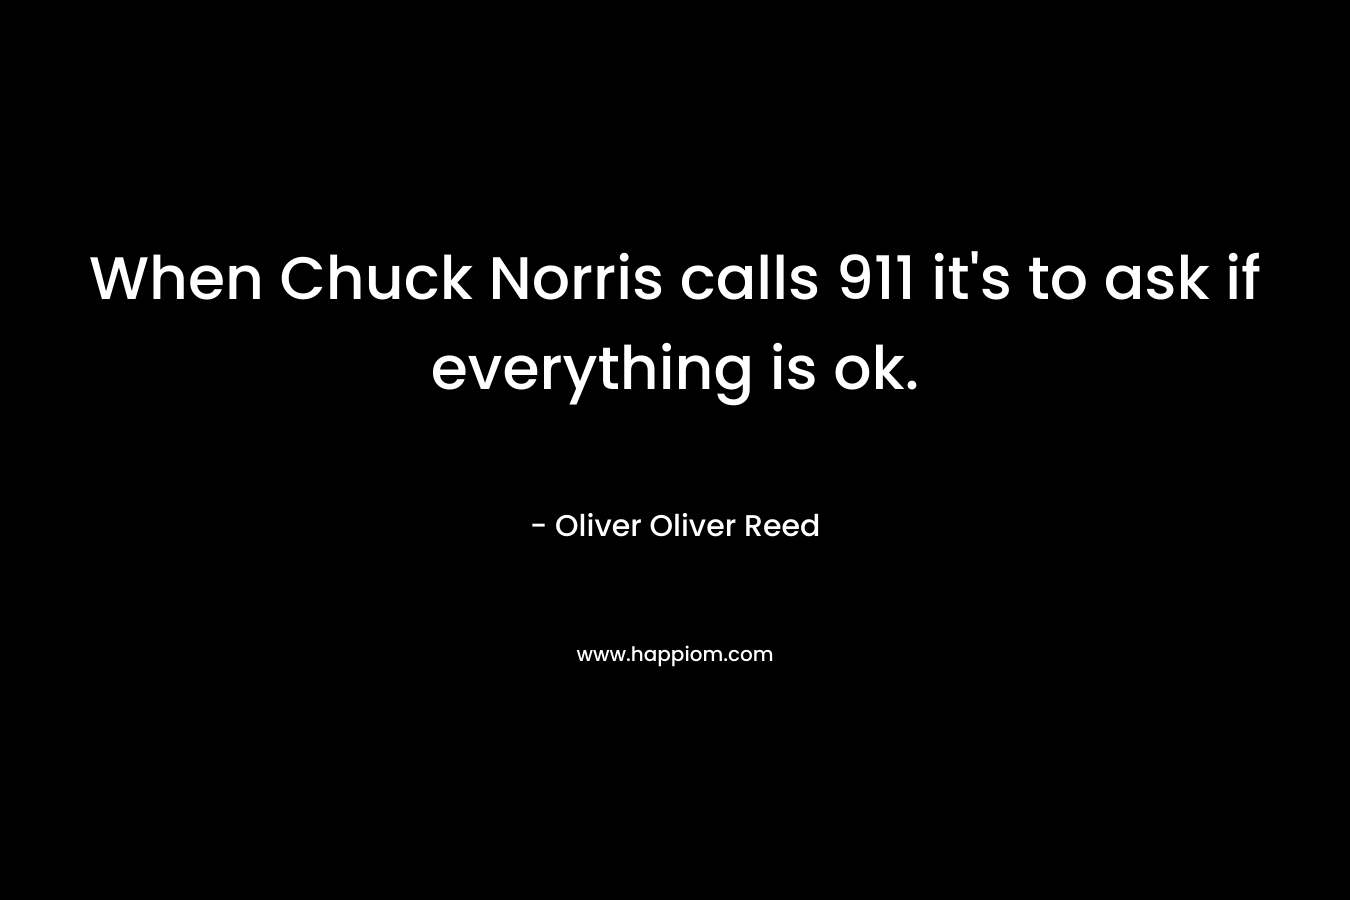 When Chuck Norris calls 911 it's to ask if everything is ok.